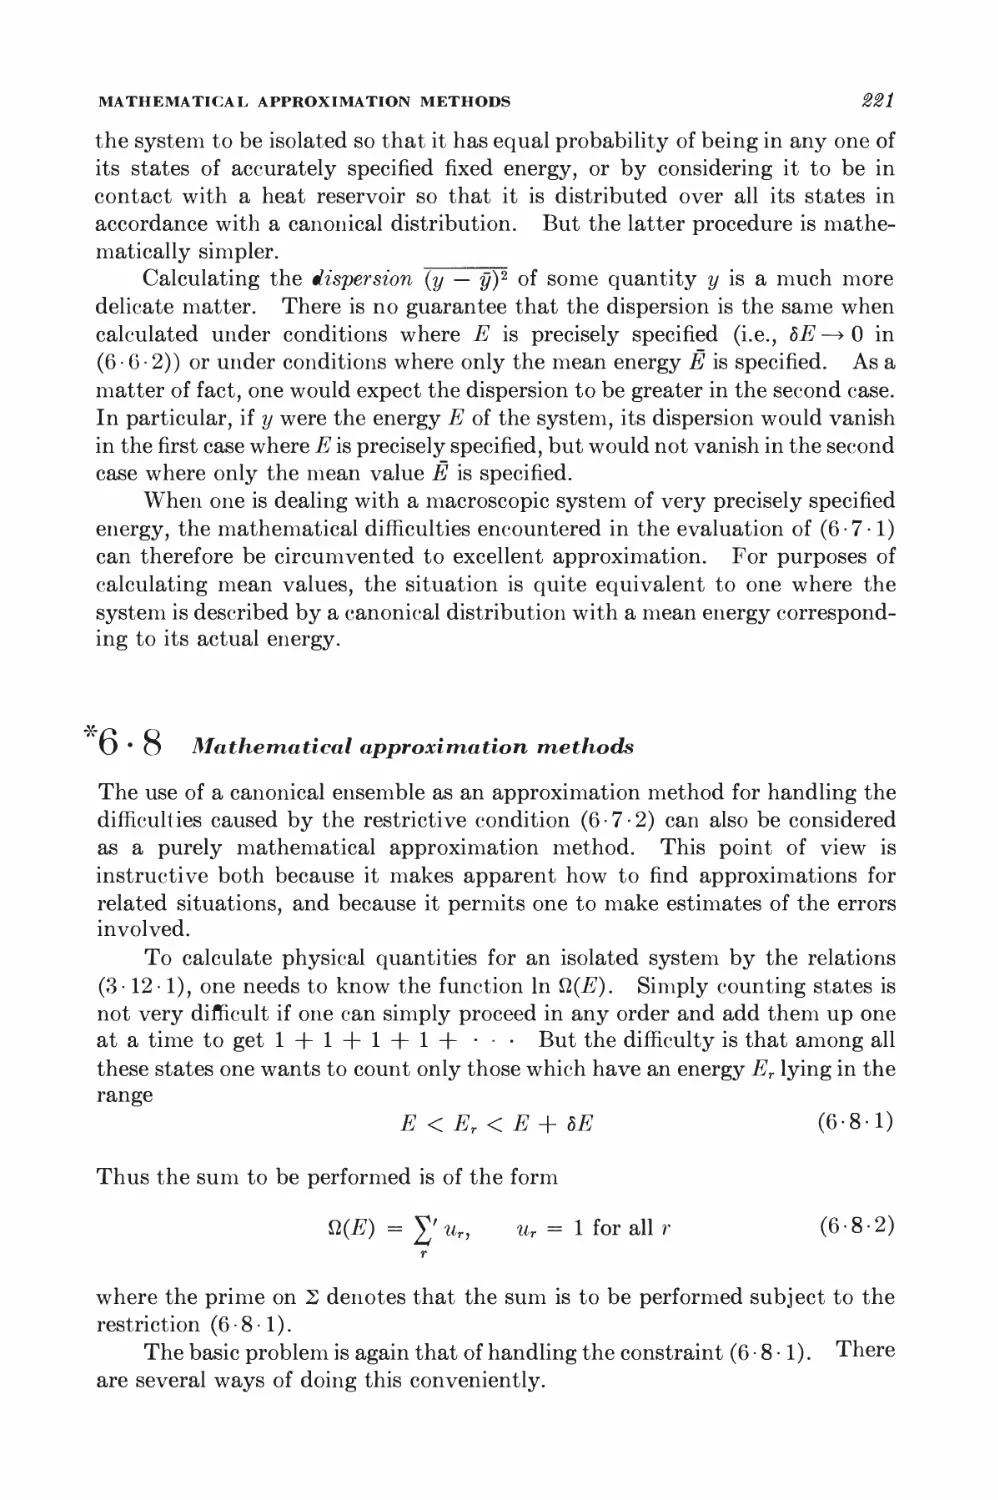 6.8 Mathematical approximation methods